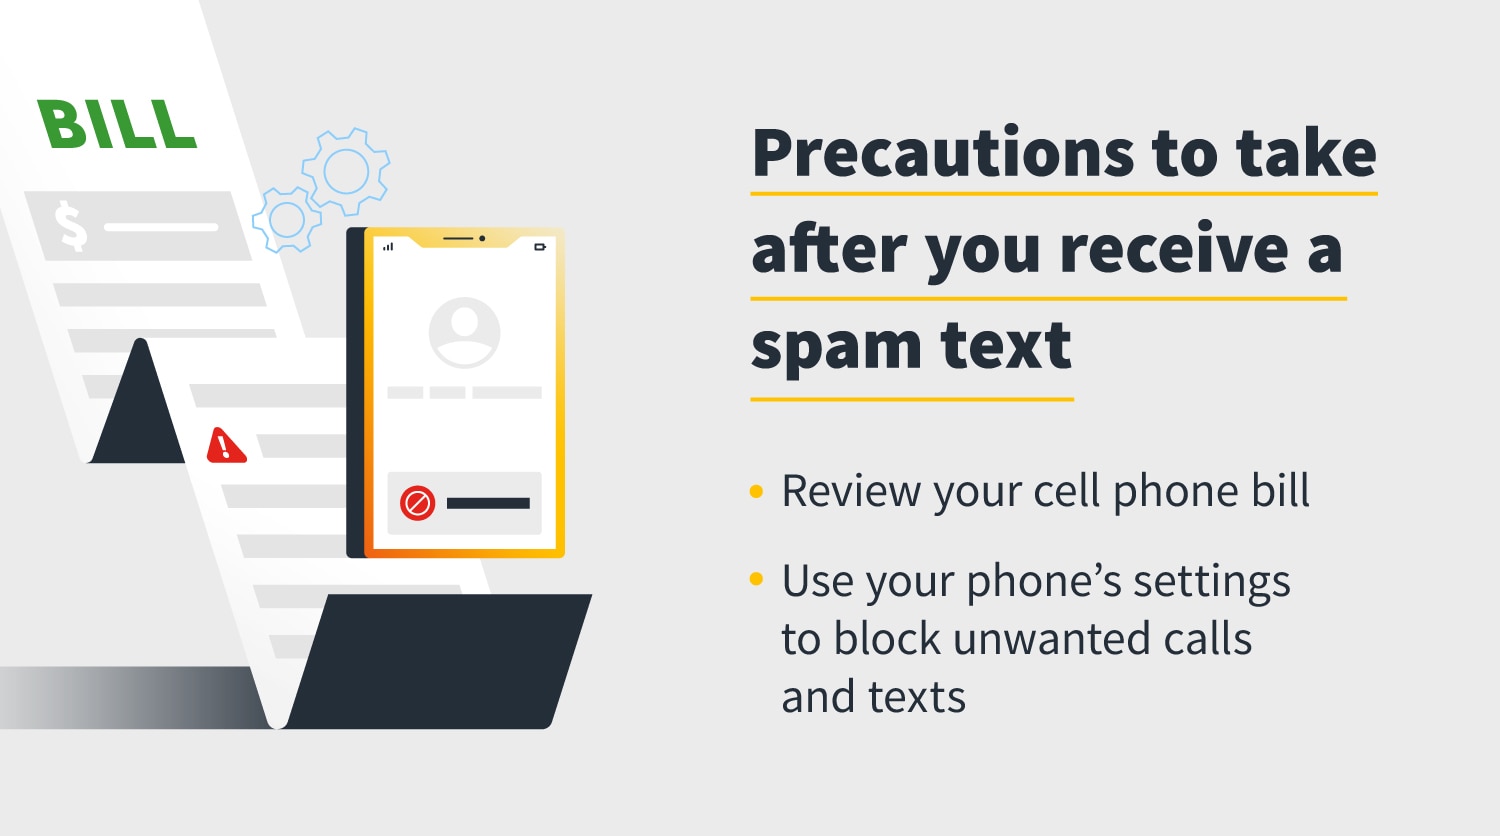 Precautions after you receive spam text